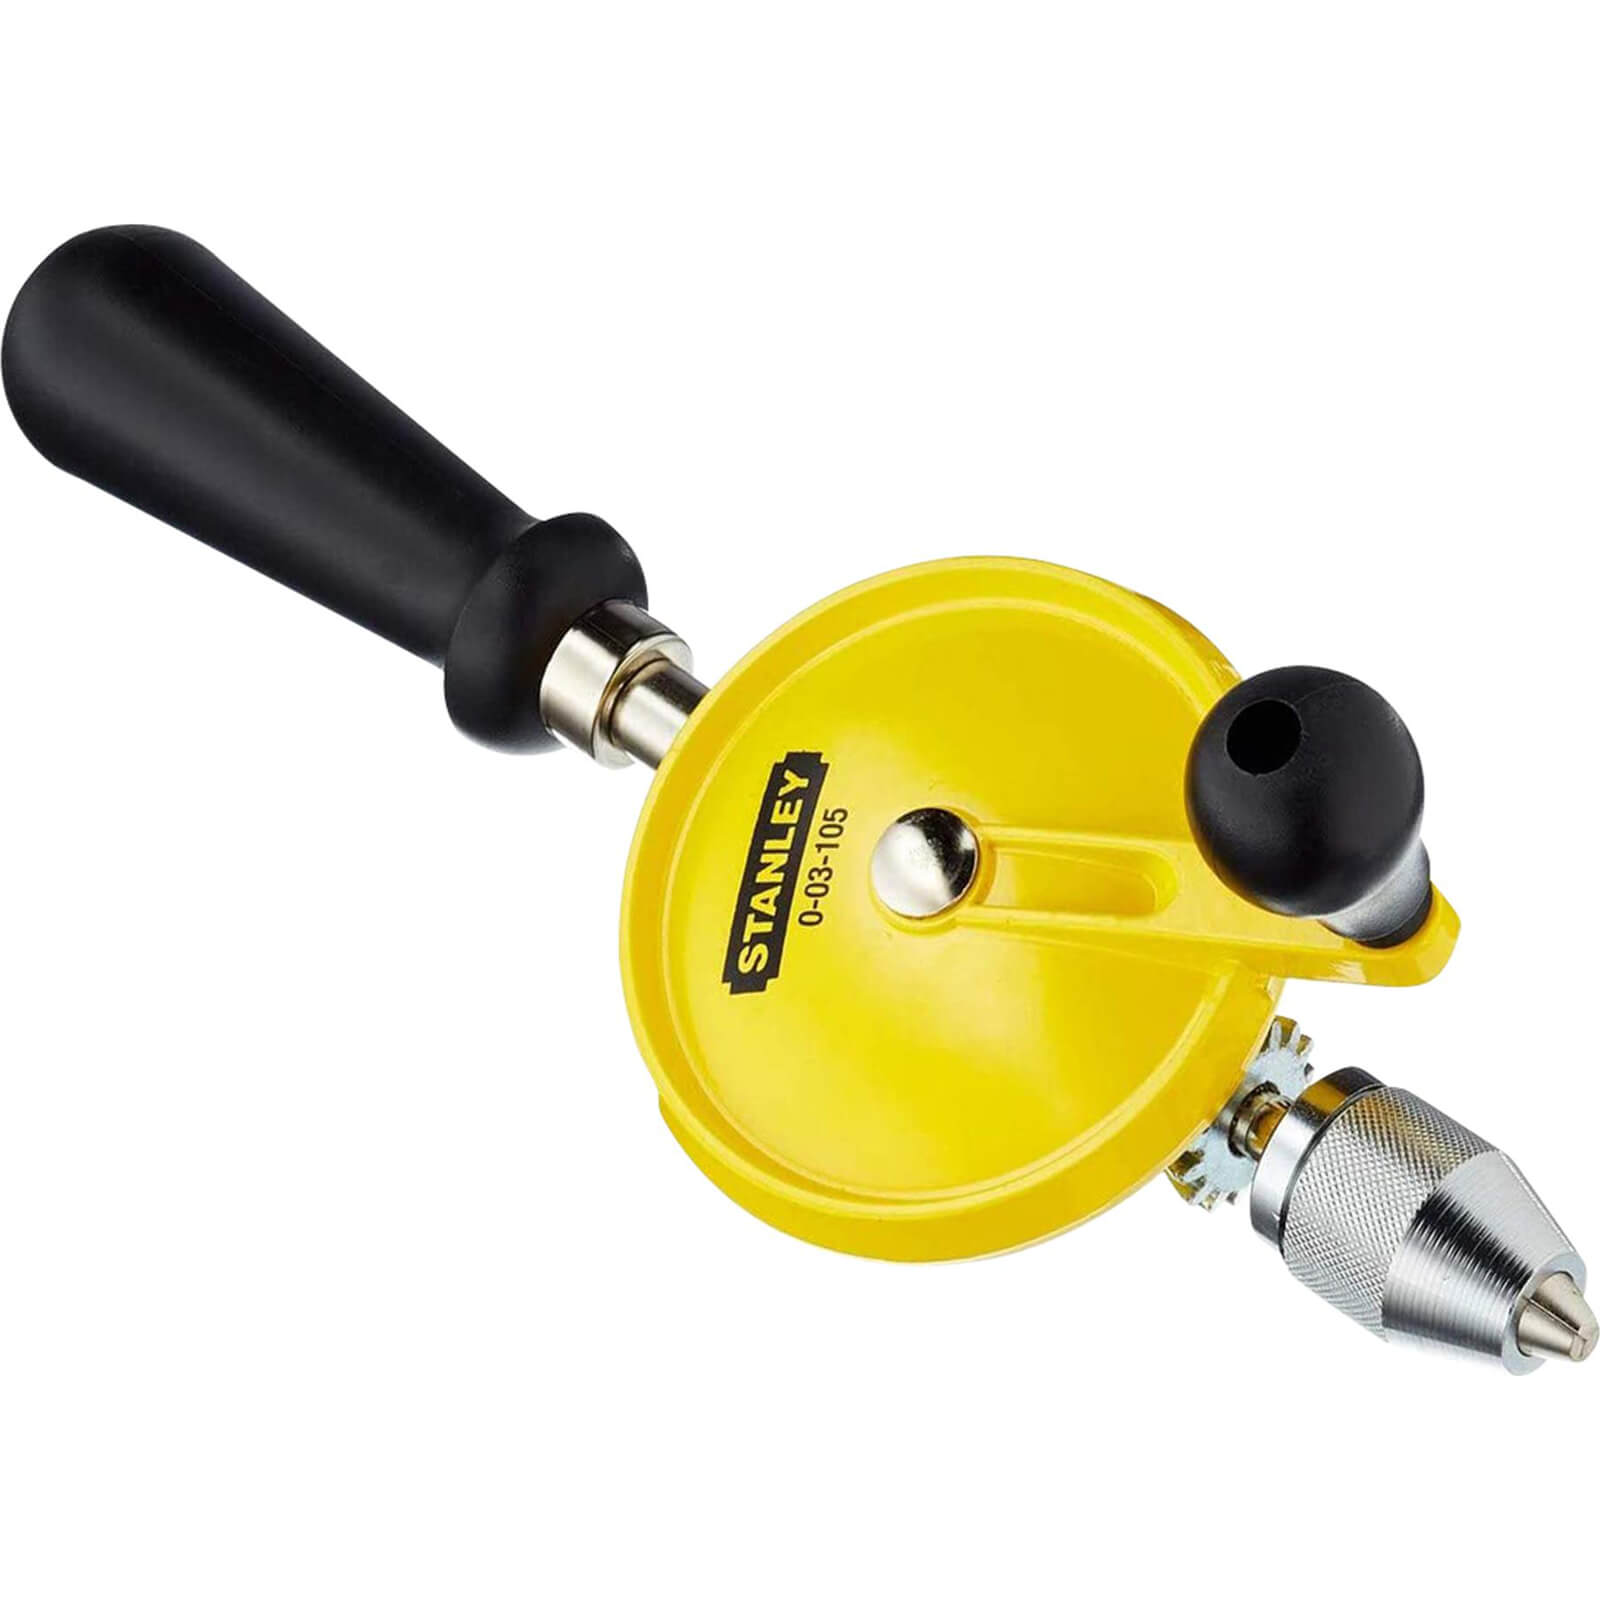 Image of Stanley 105 Hand Drill